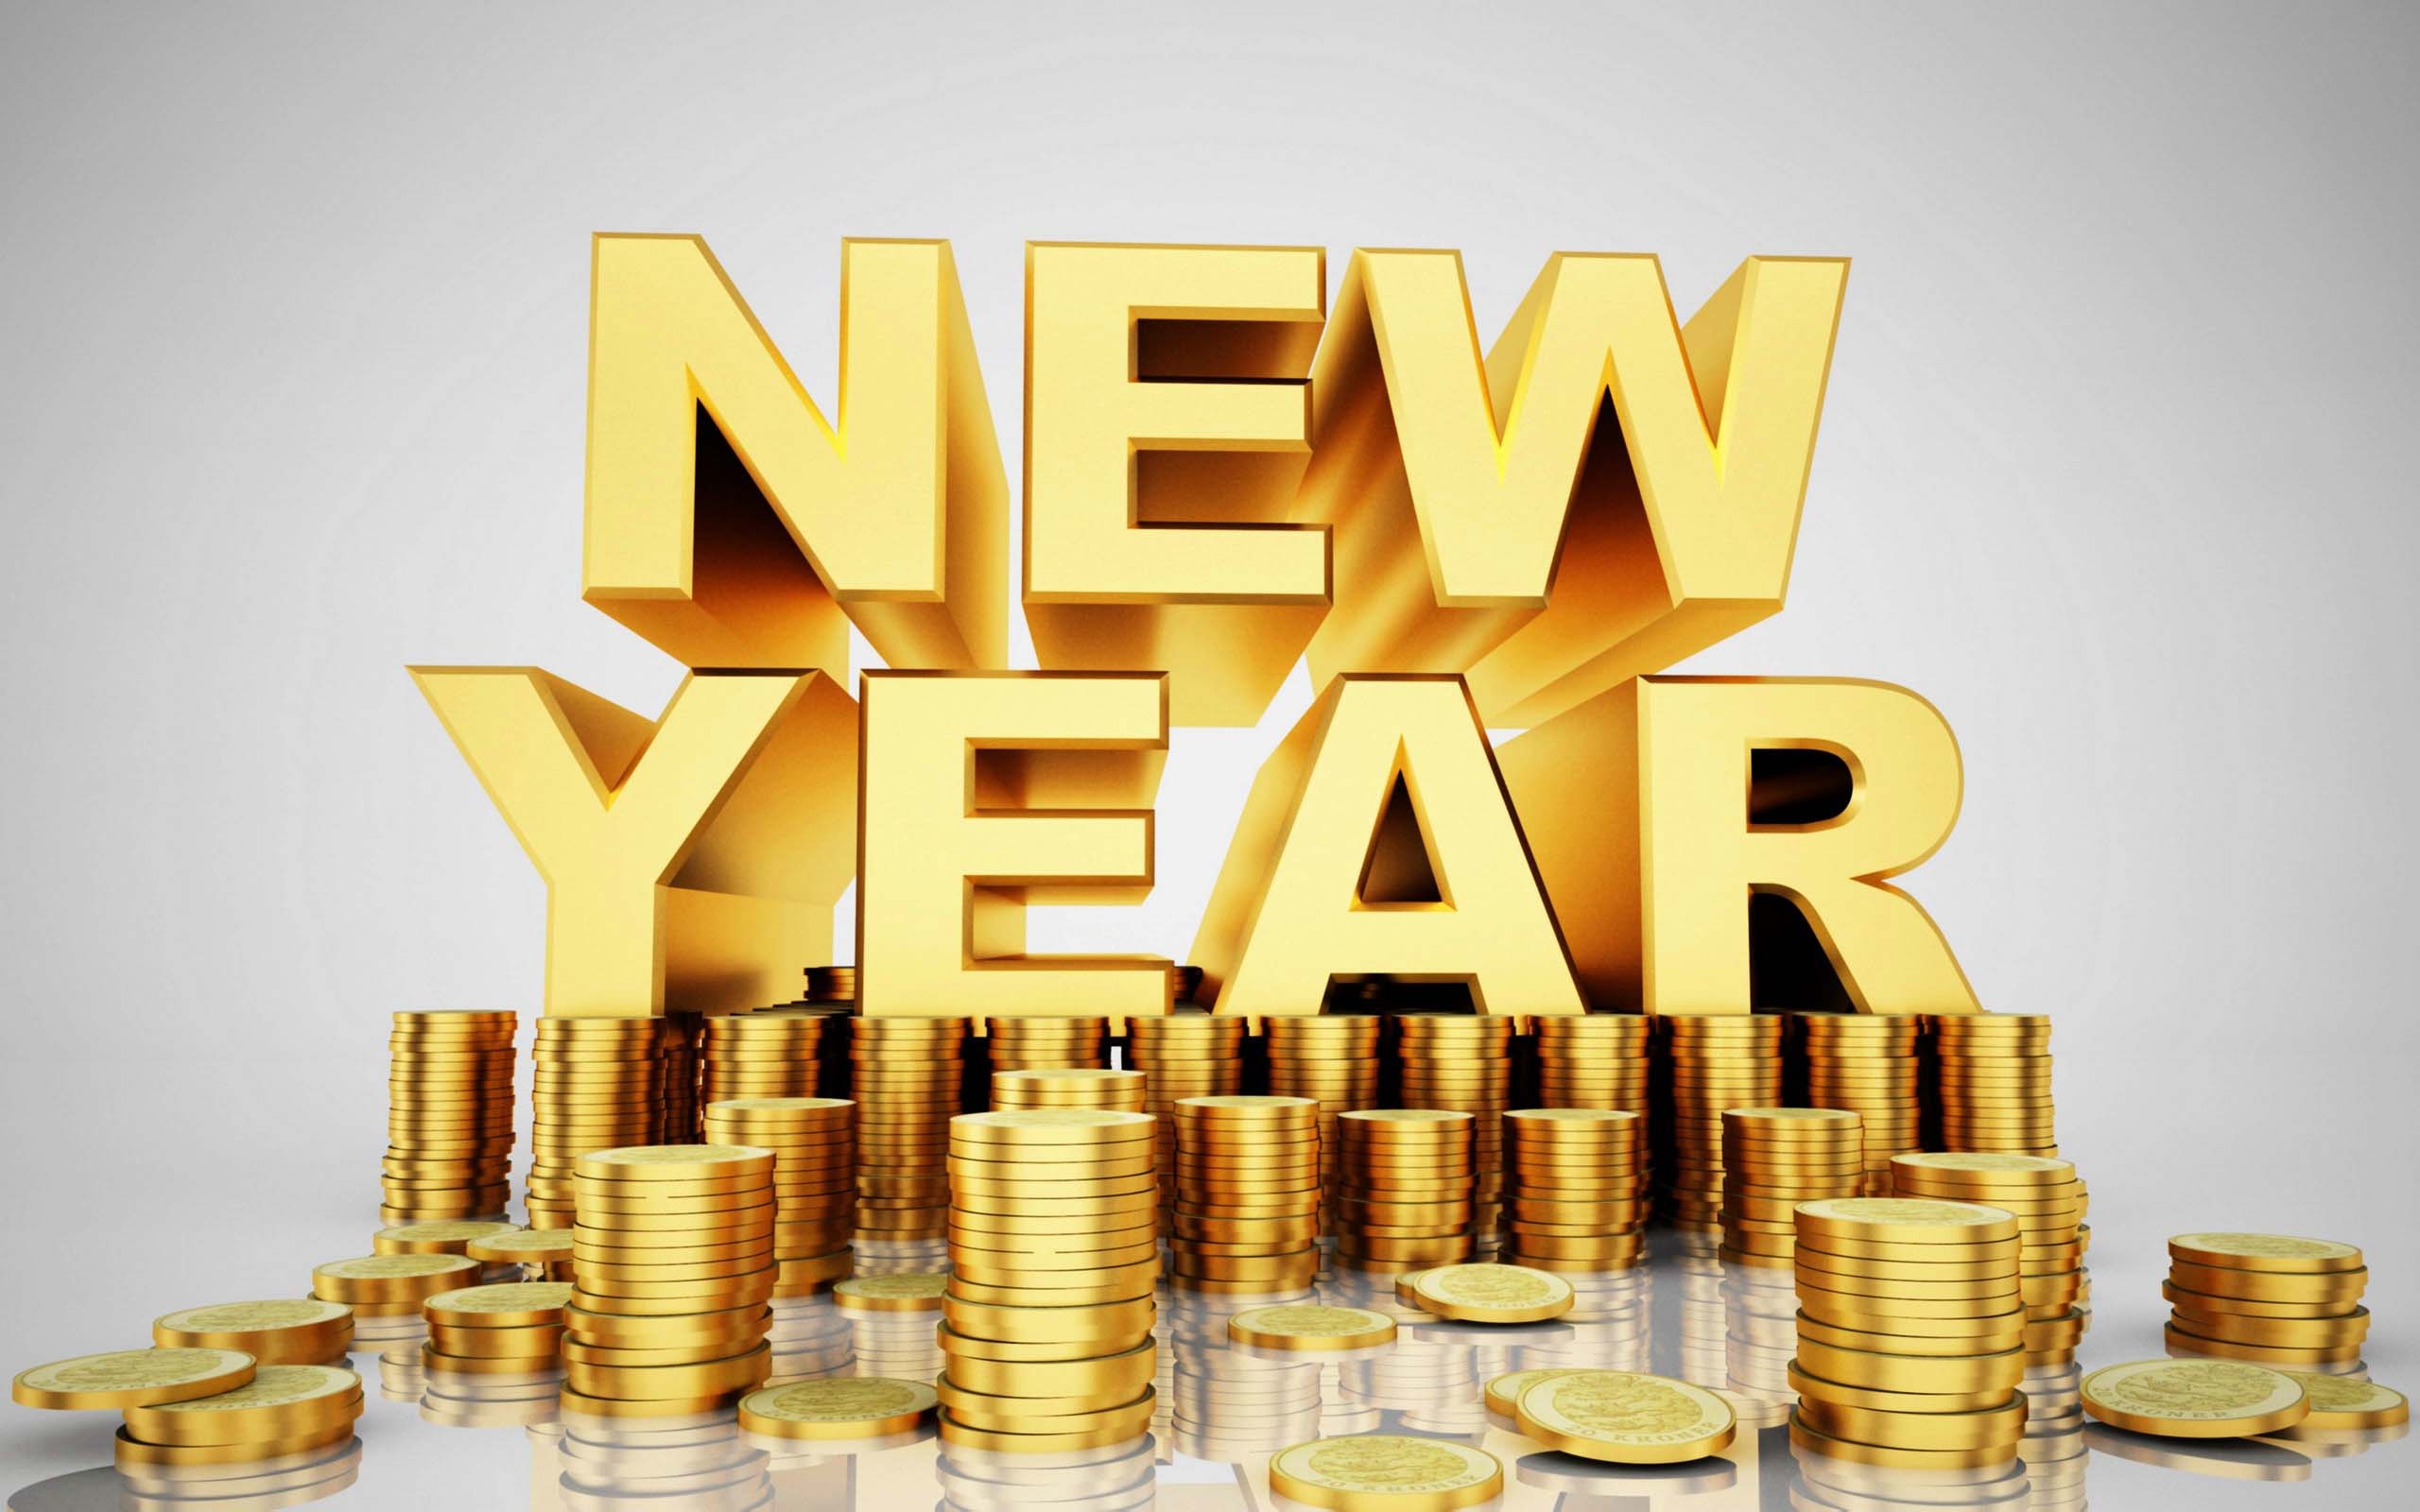 New Year Images With Money - HD Wallpaper 